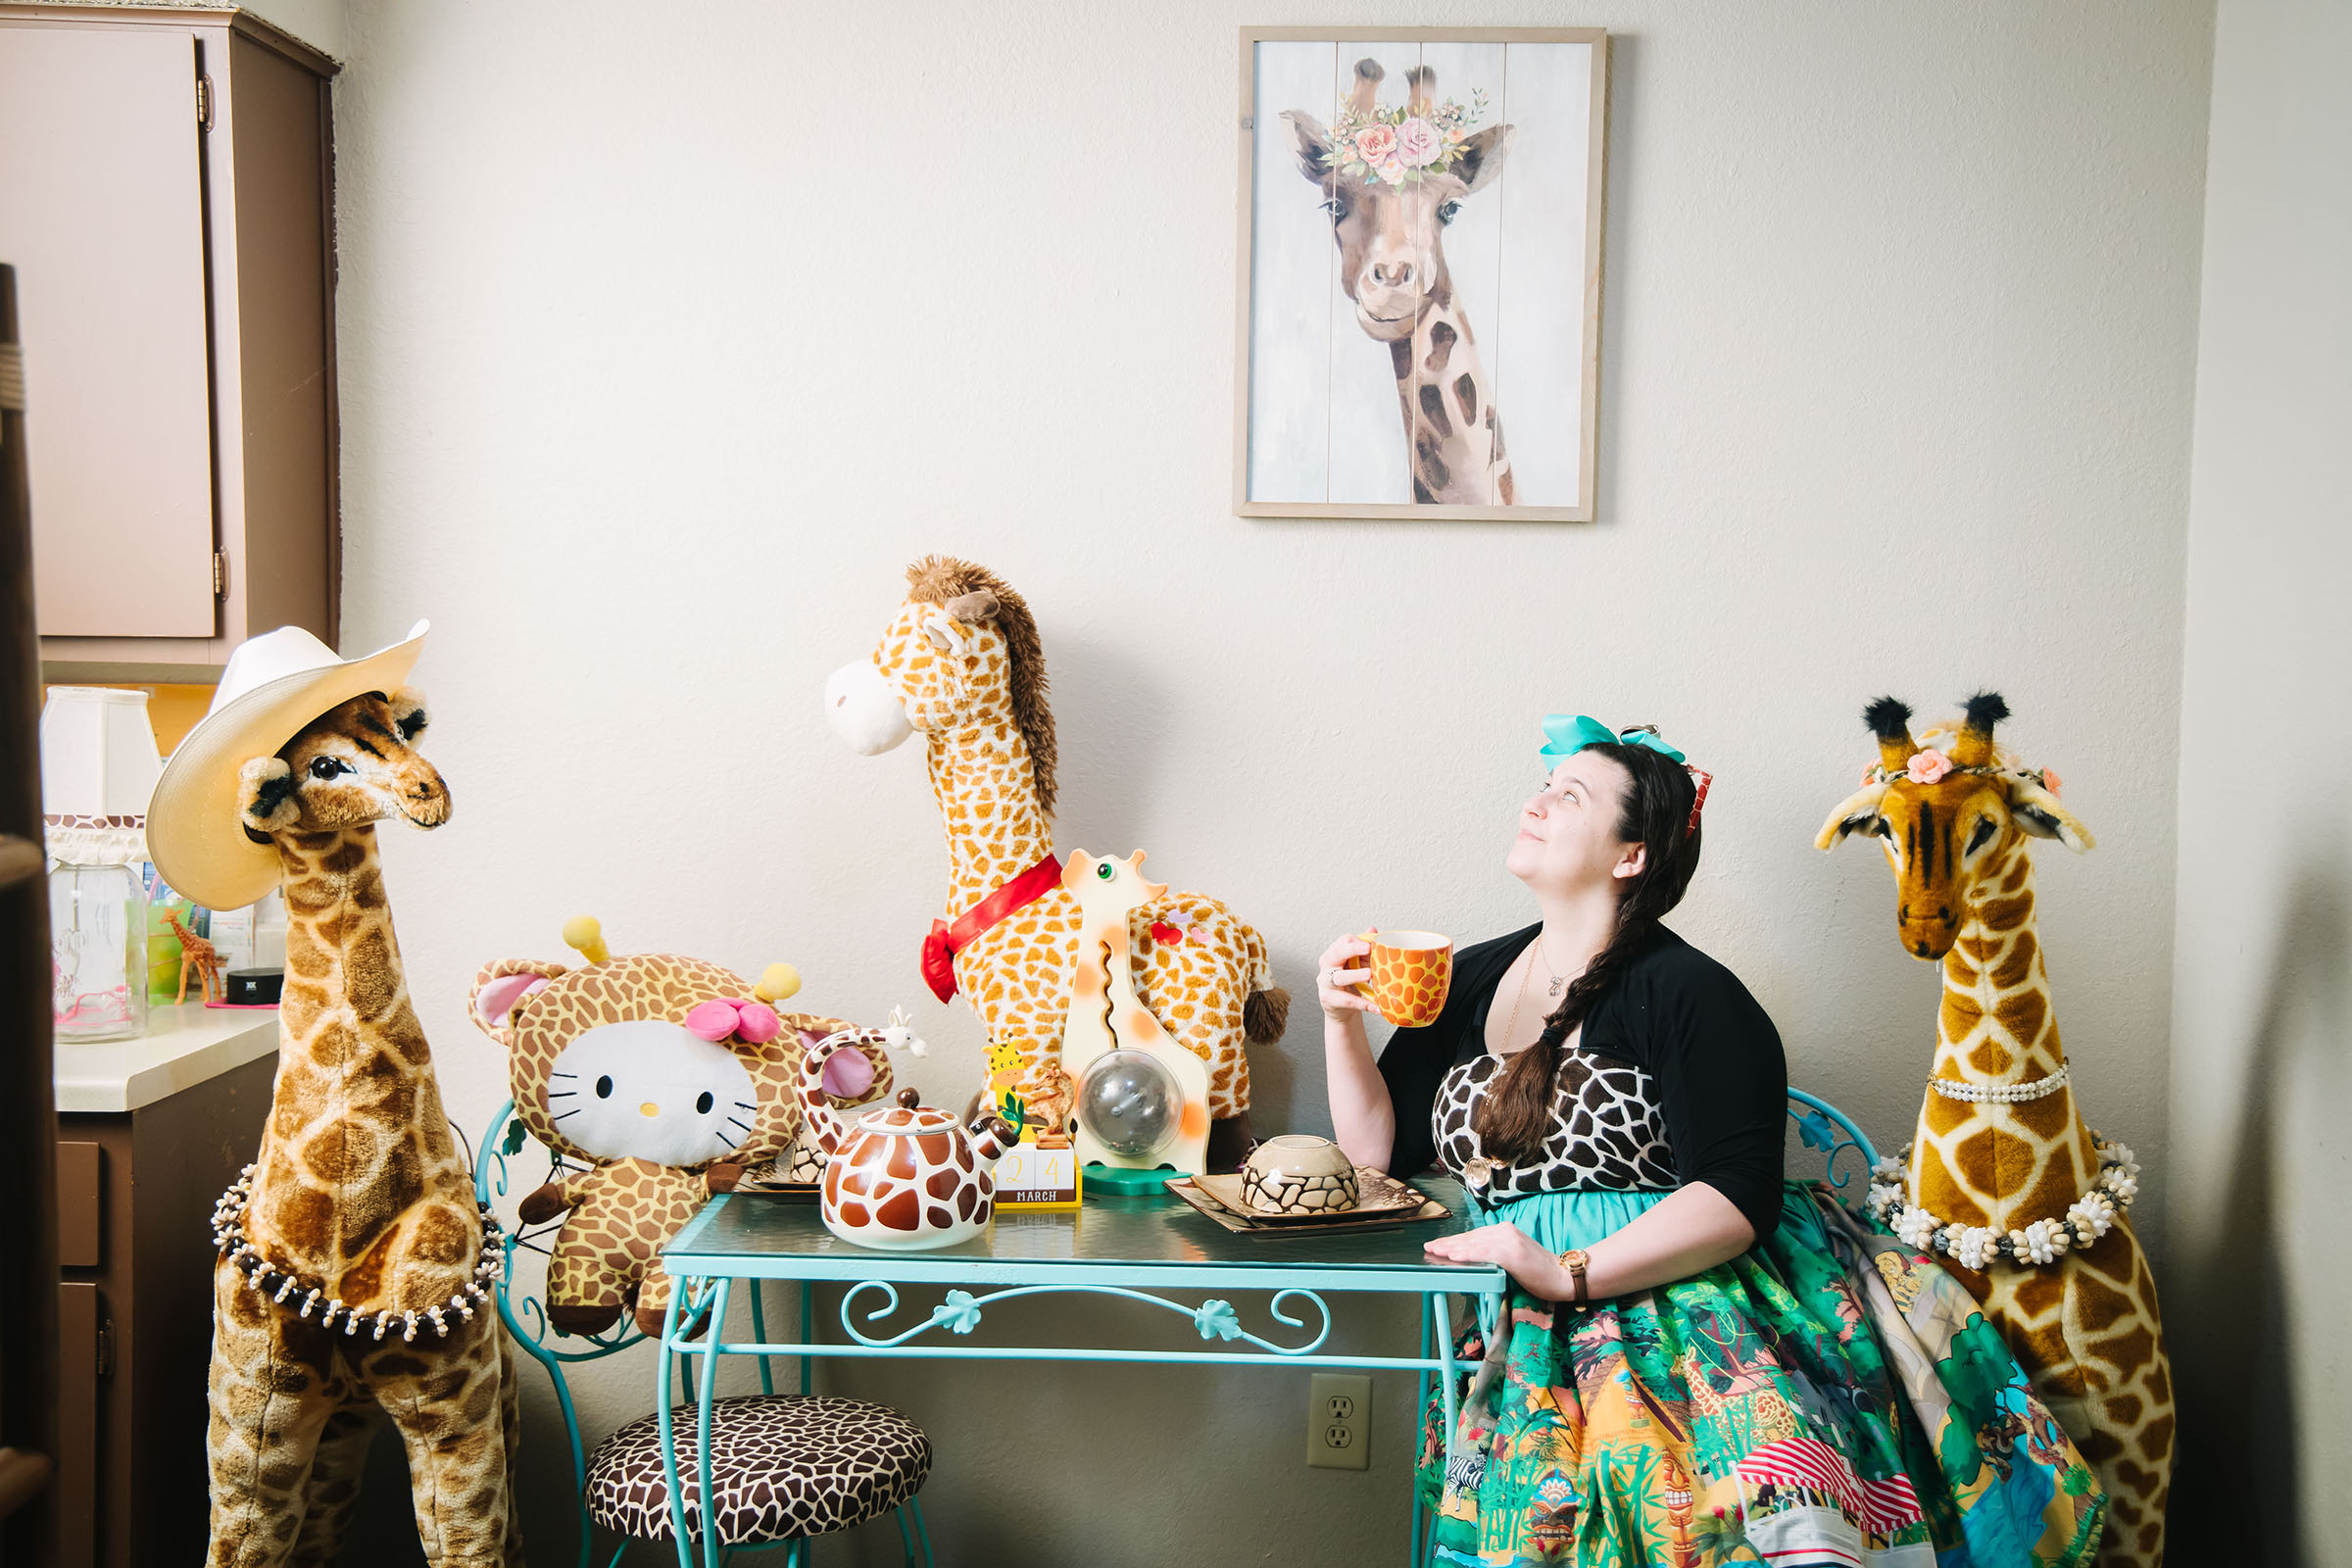 Autumn Circé surrounded by her giraffe collection.